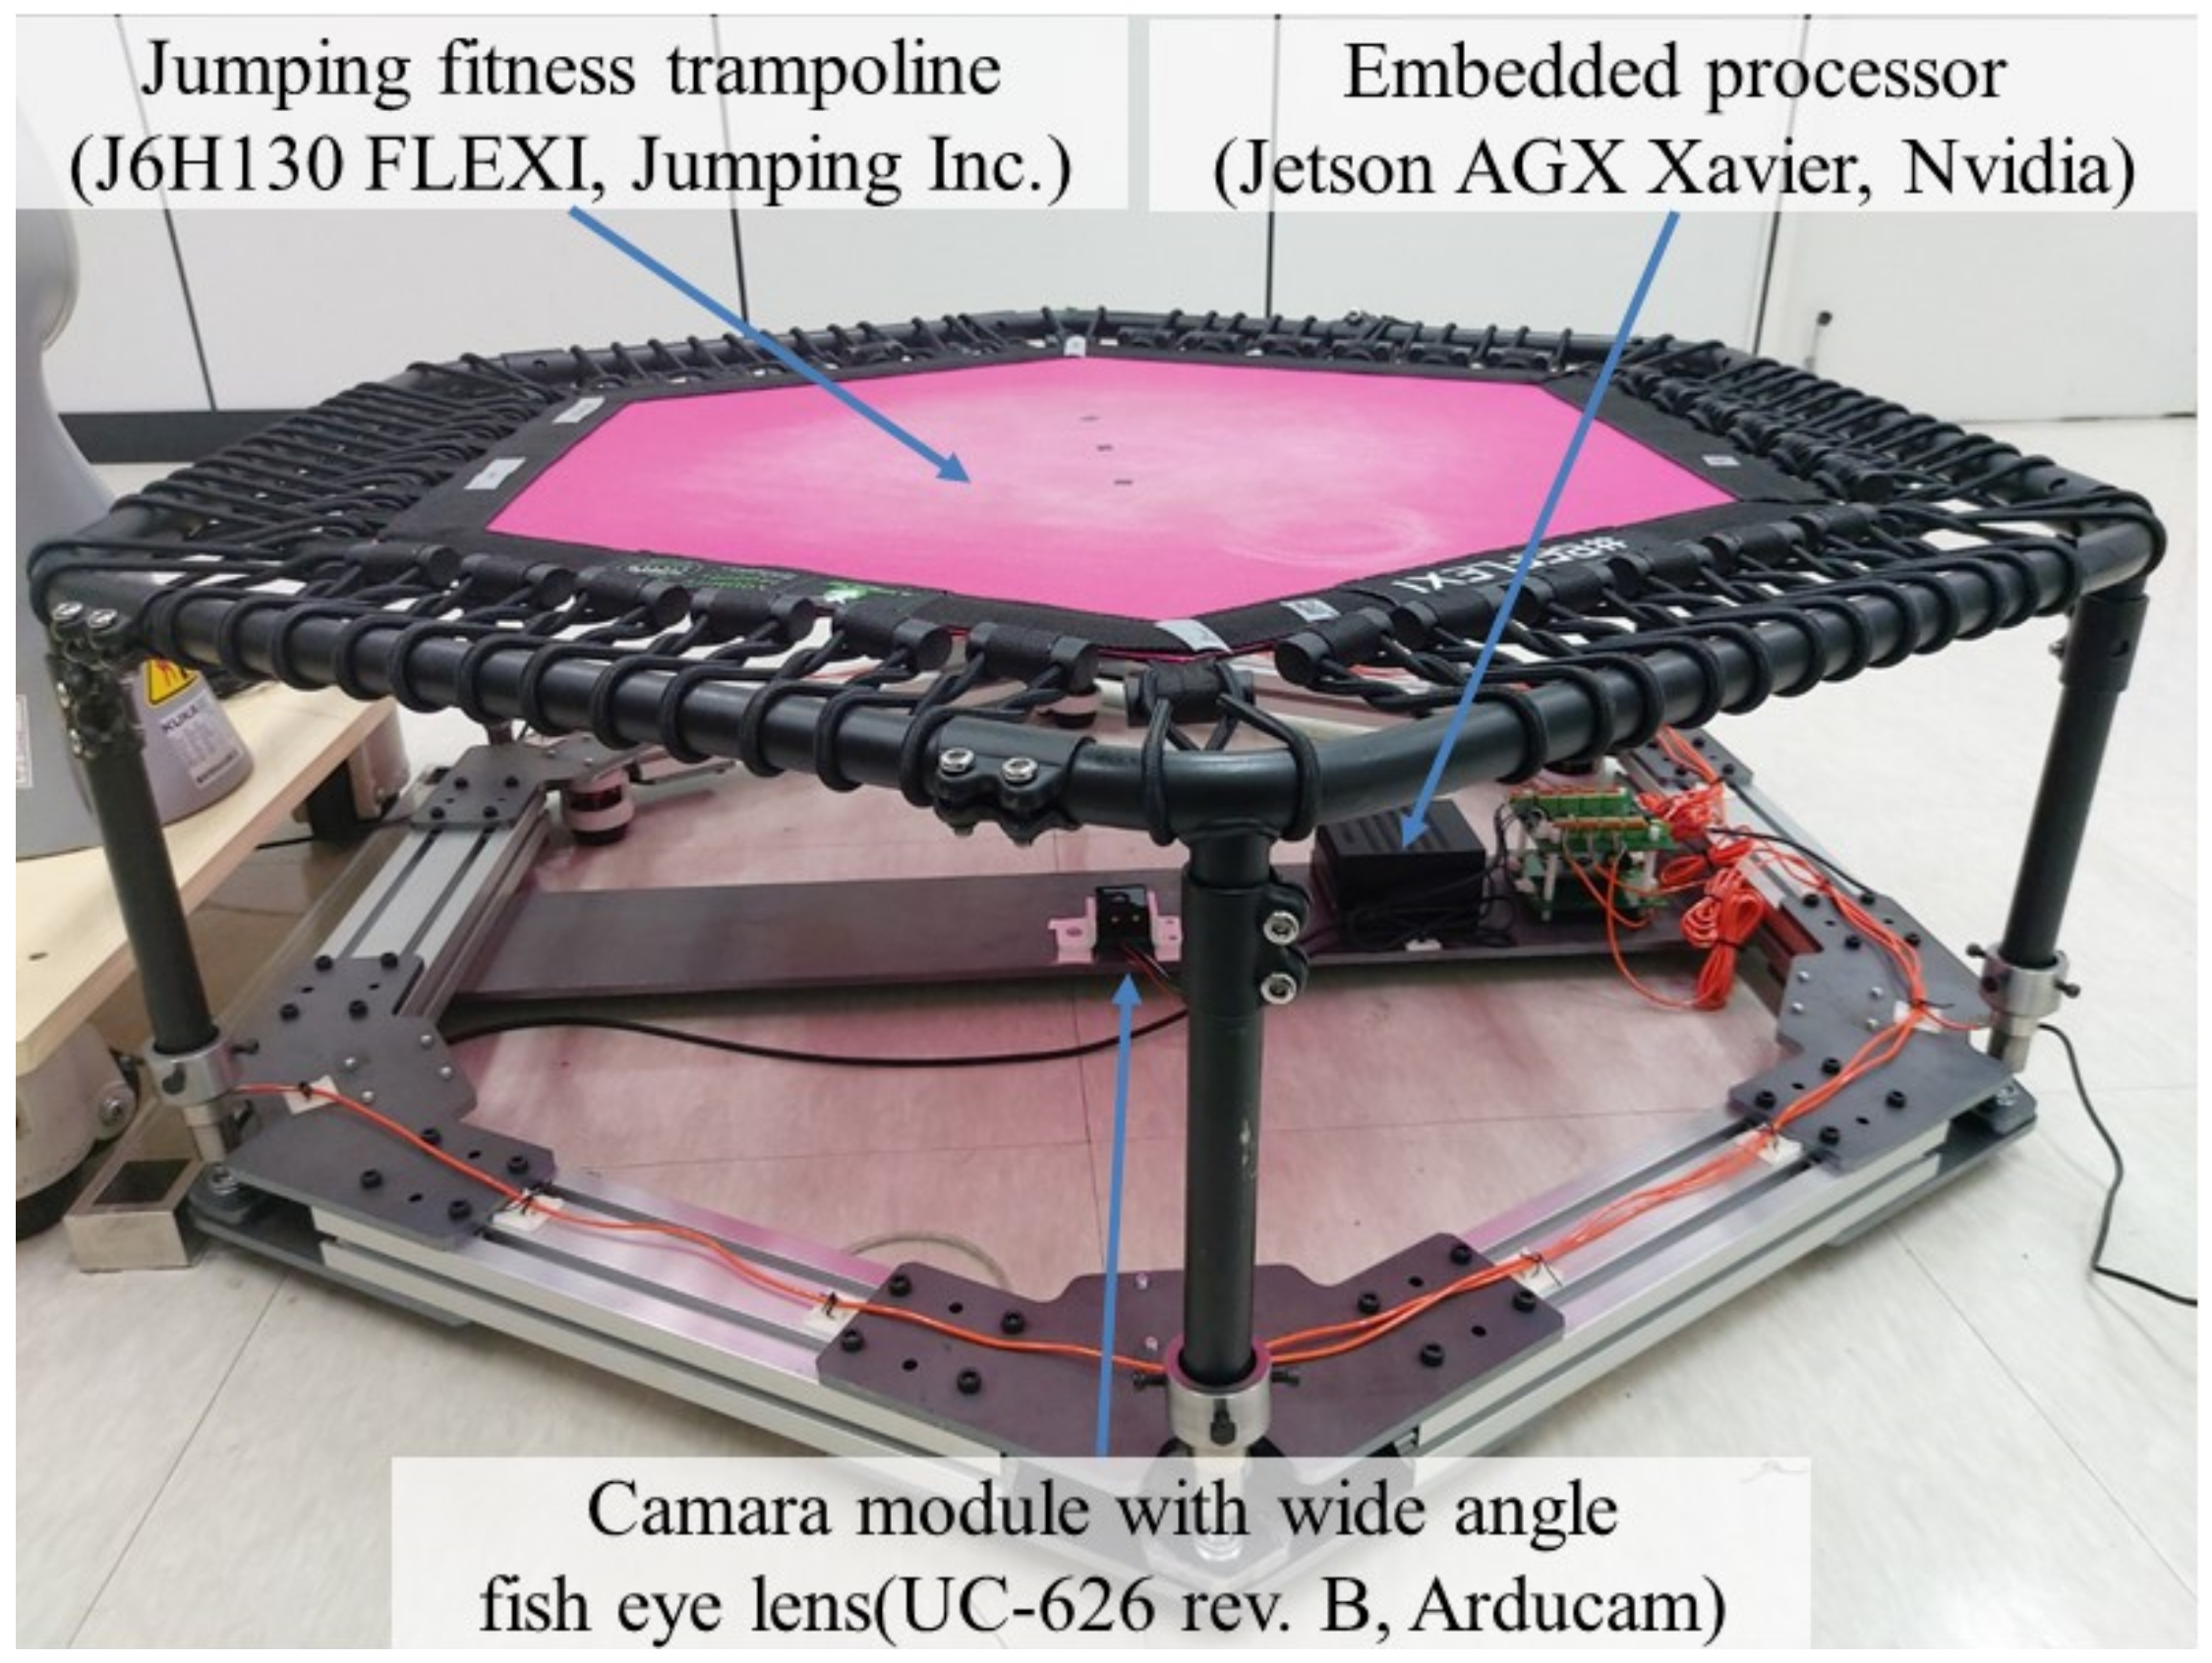 Sensors | Free Full-Text | Three-Dimensional Foot Position Estimation Based  on Footprint Shadow Image Processing and Deep Learning for Smart Trampoline  Fitness System